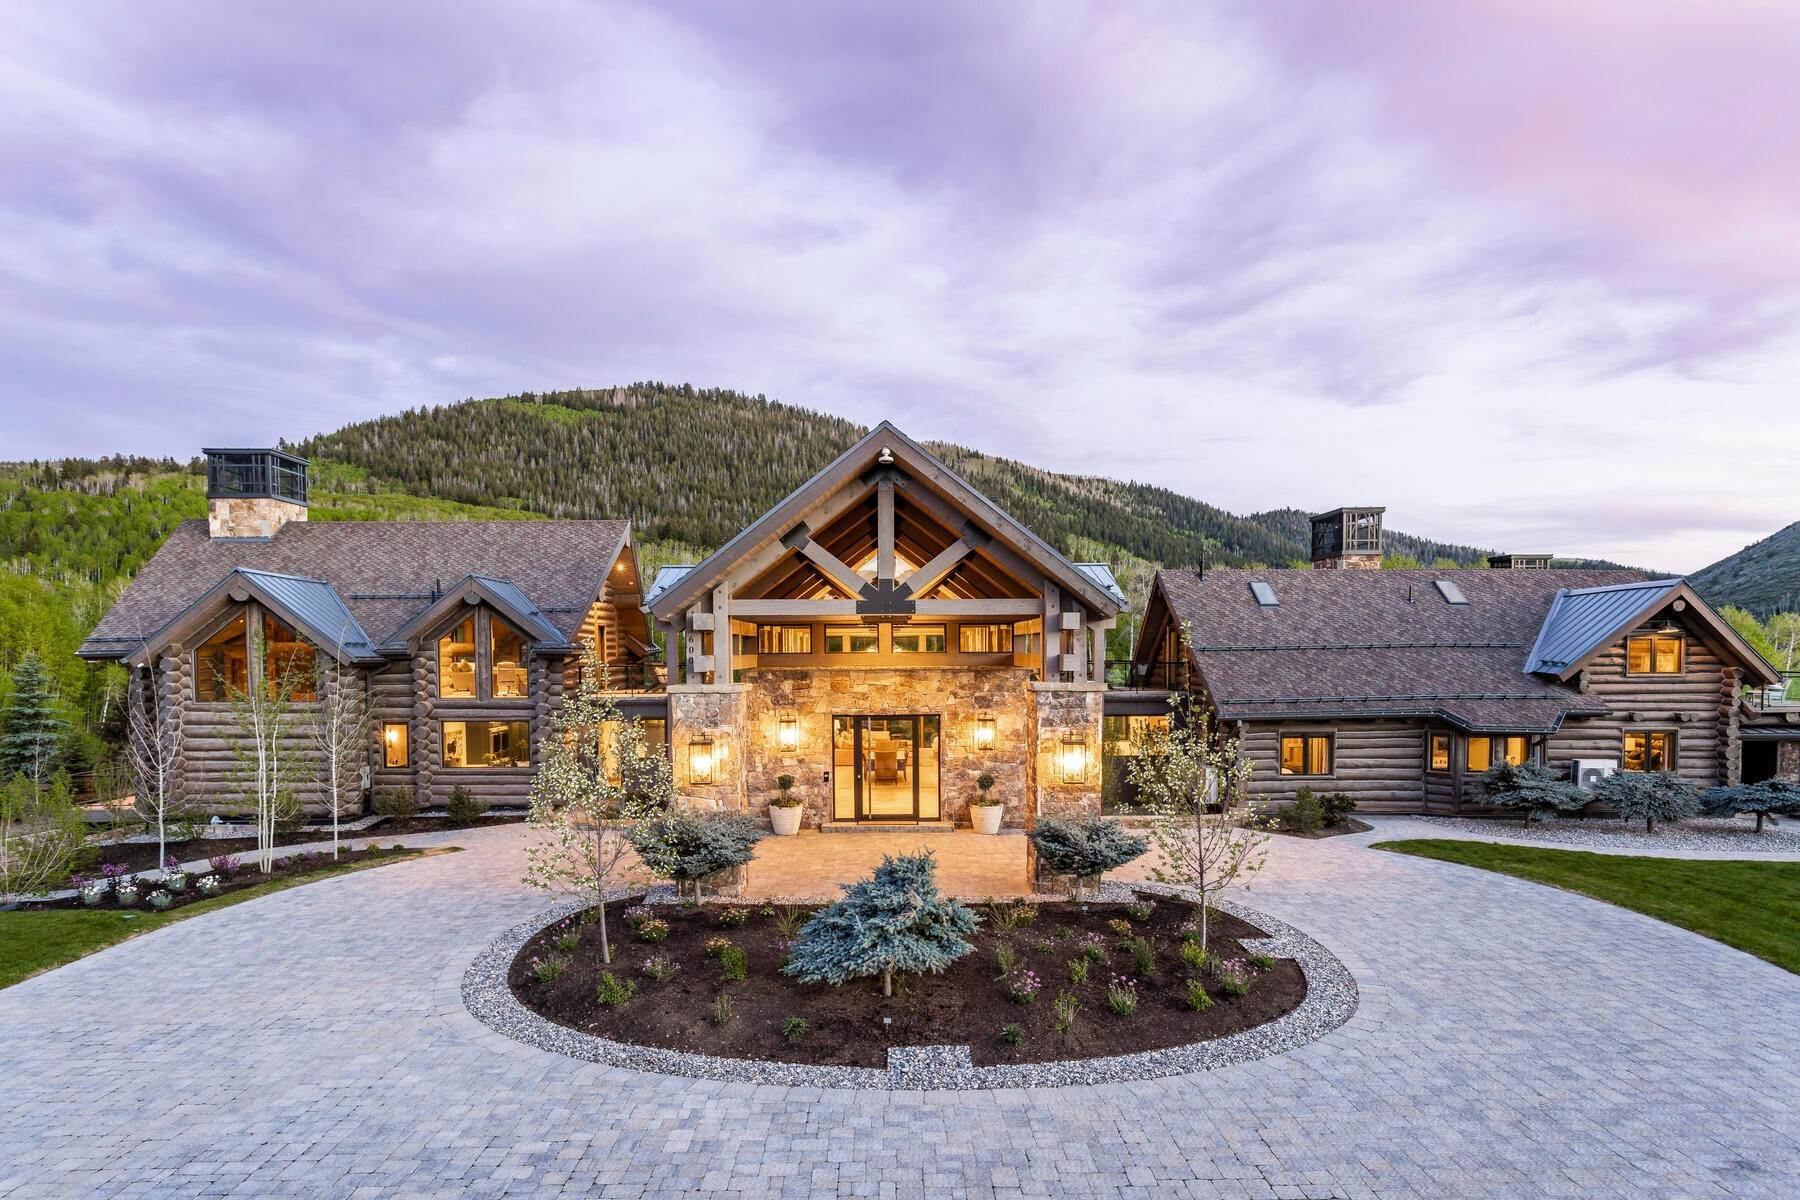 6. Single Family Homes for Sale at 50 Acres Off The Grid In This Modern Mountain Estate 7600 E Deer Knoll Dr Woodland, Utah 84036 United States